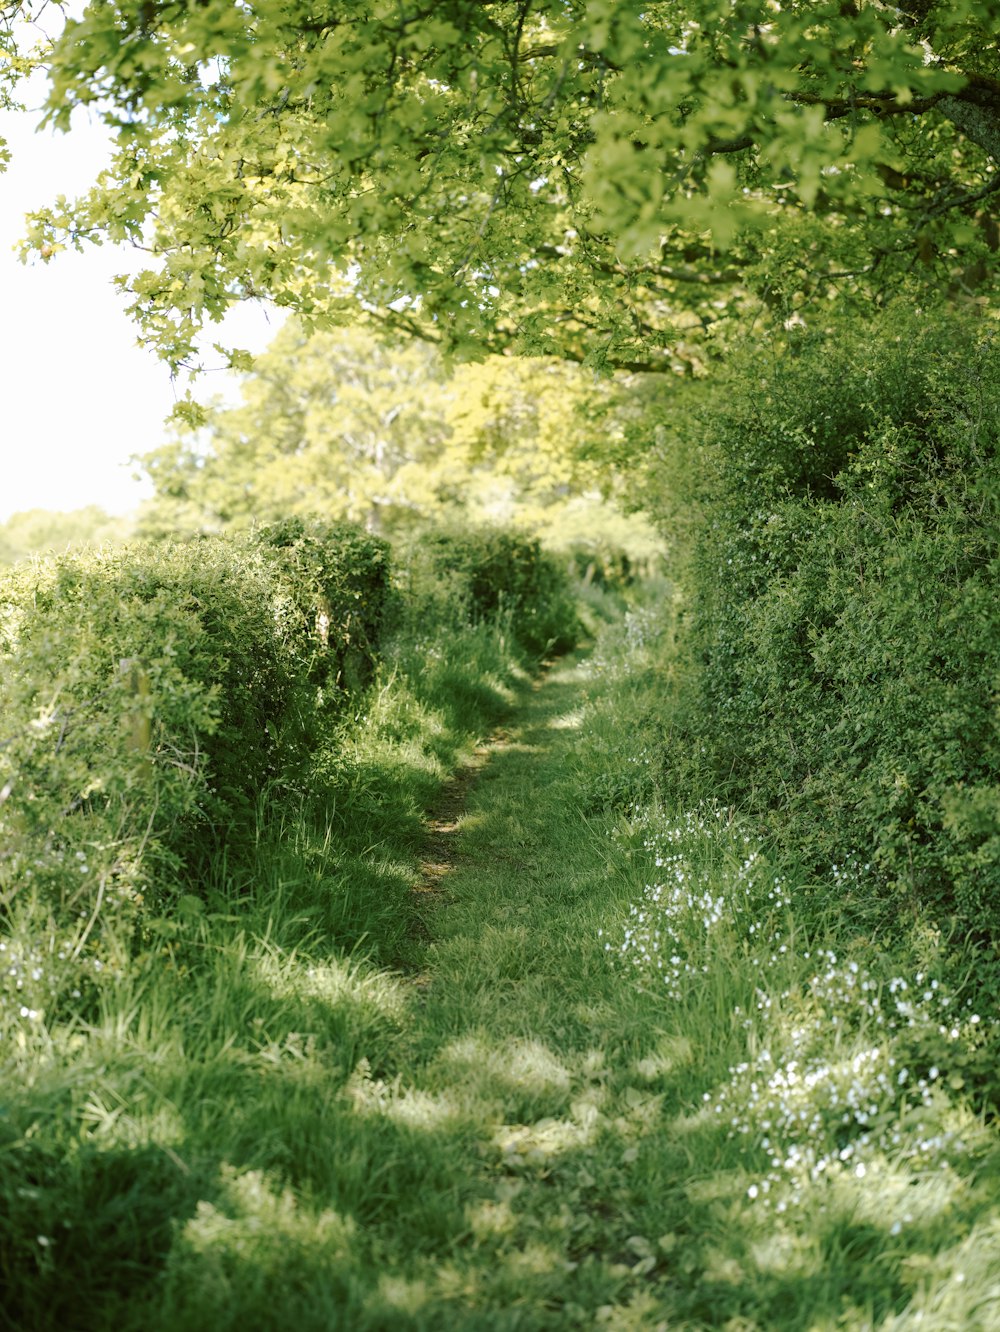 a path in the middle of a lush green field